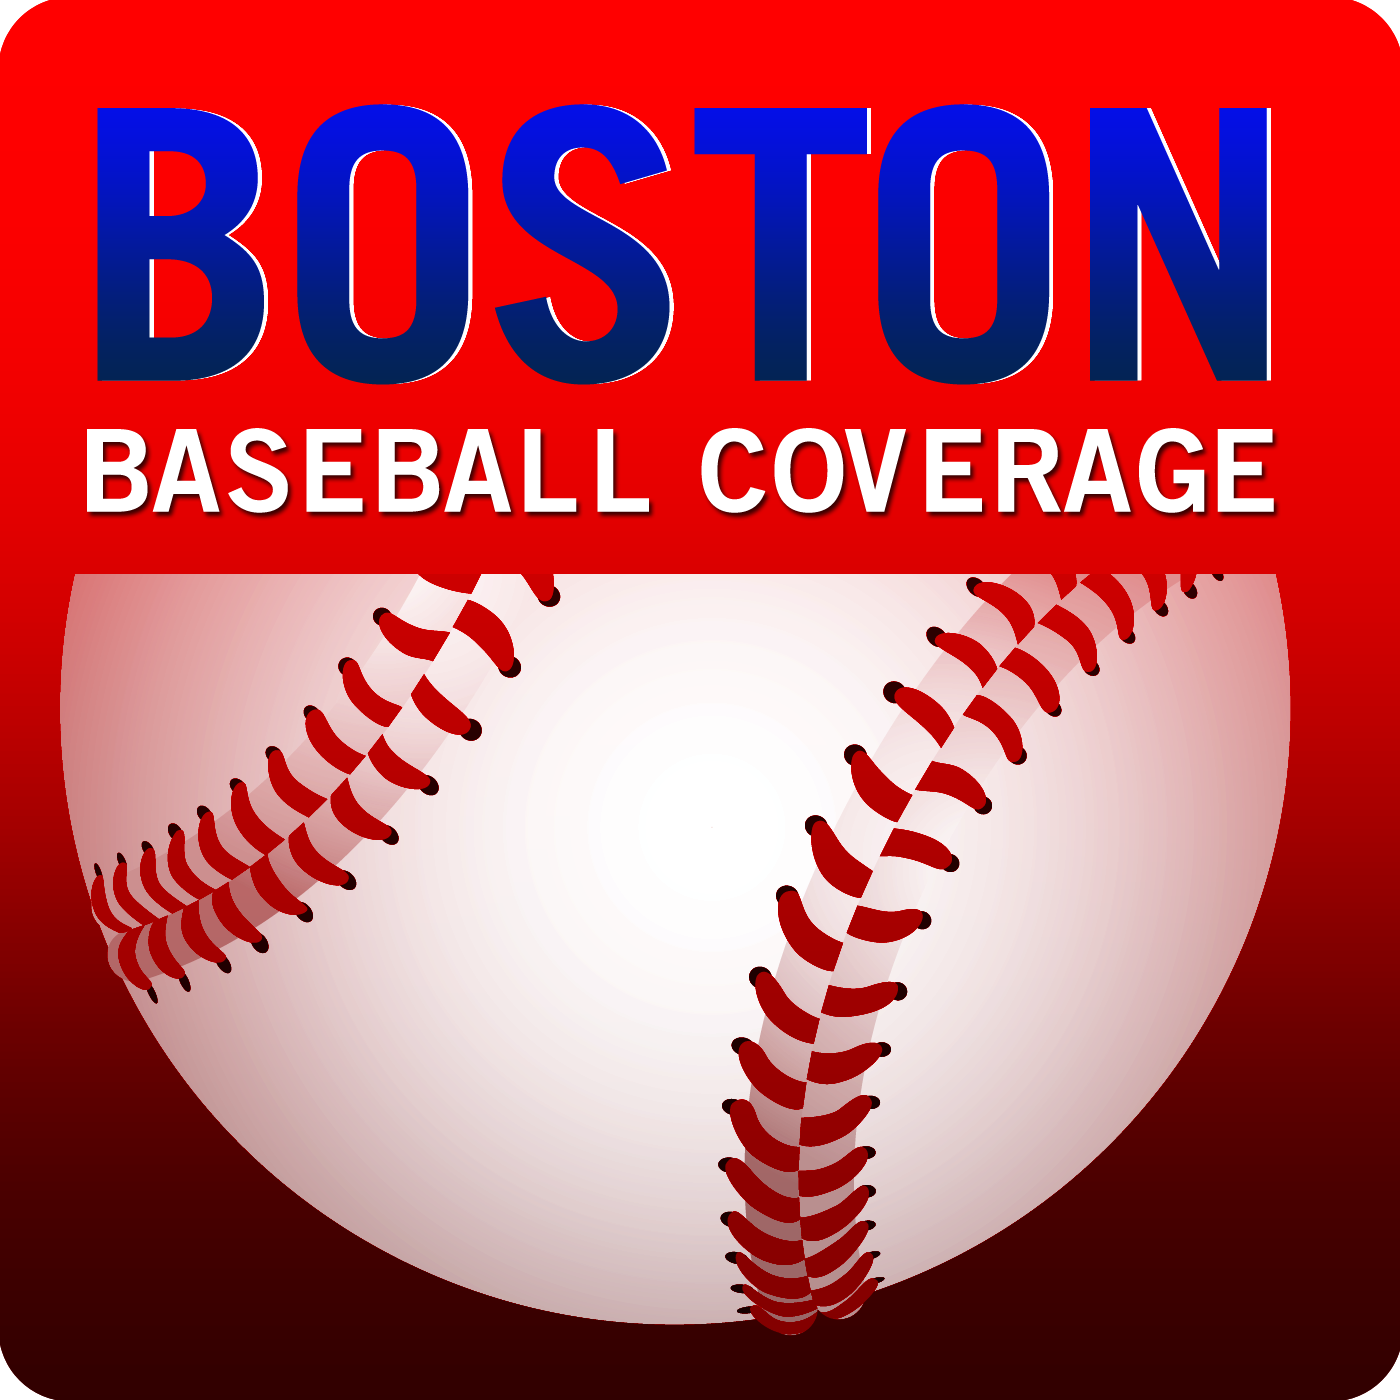 Red Sox Review - Sox dominate Pirates 8-1